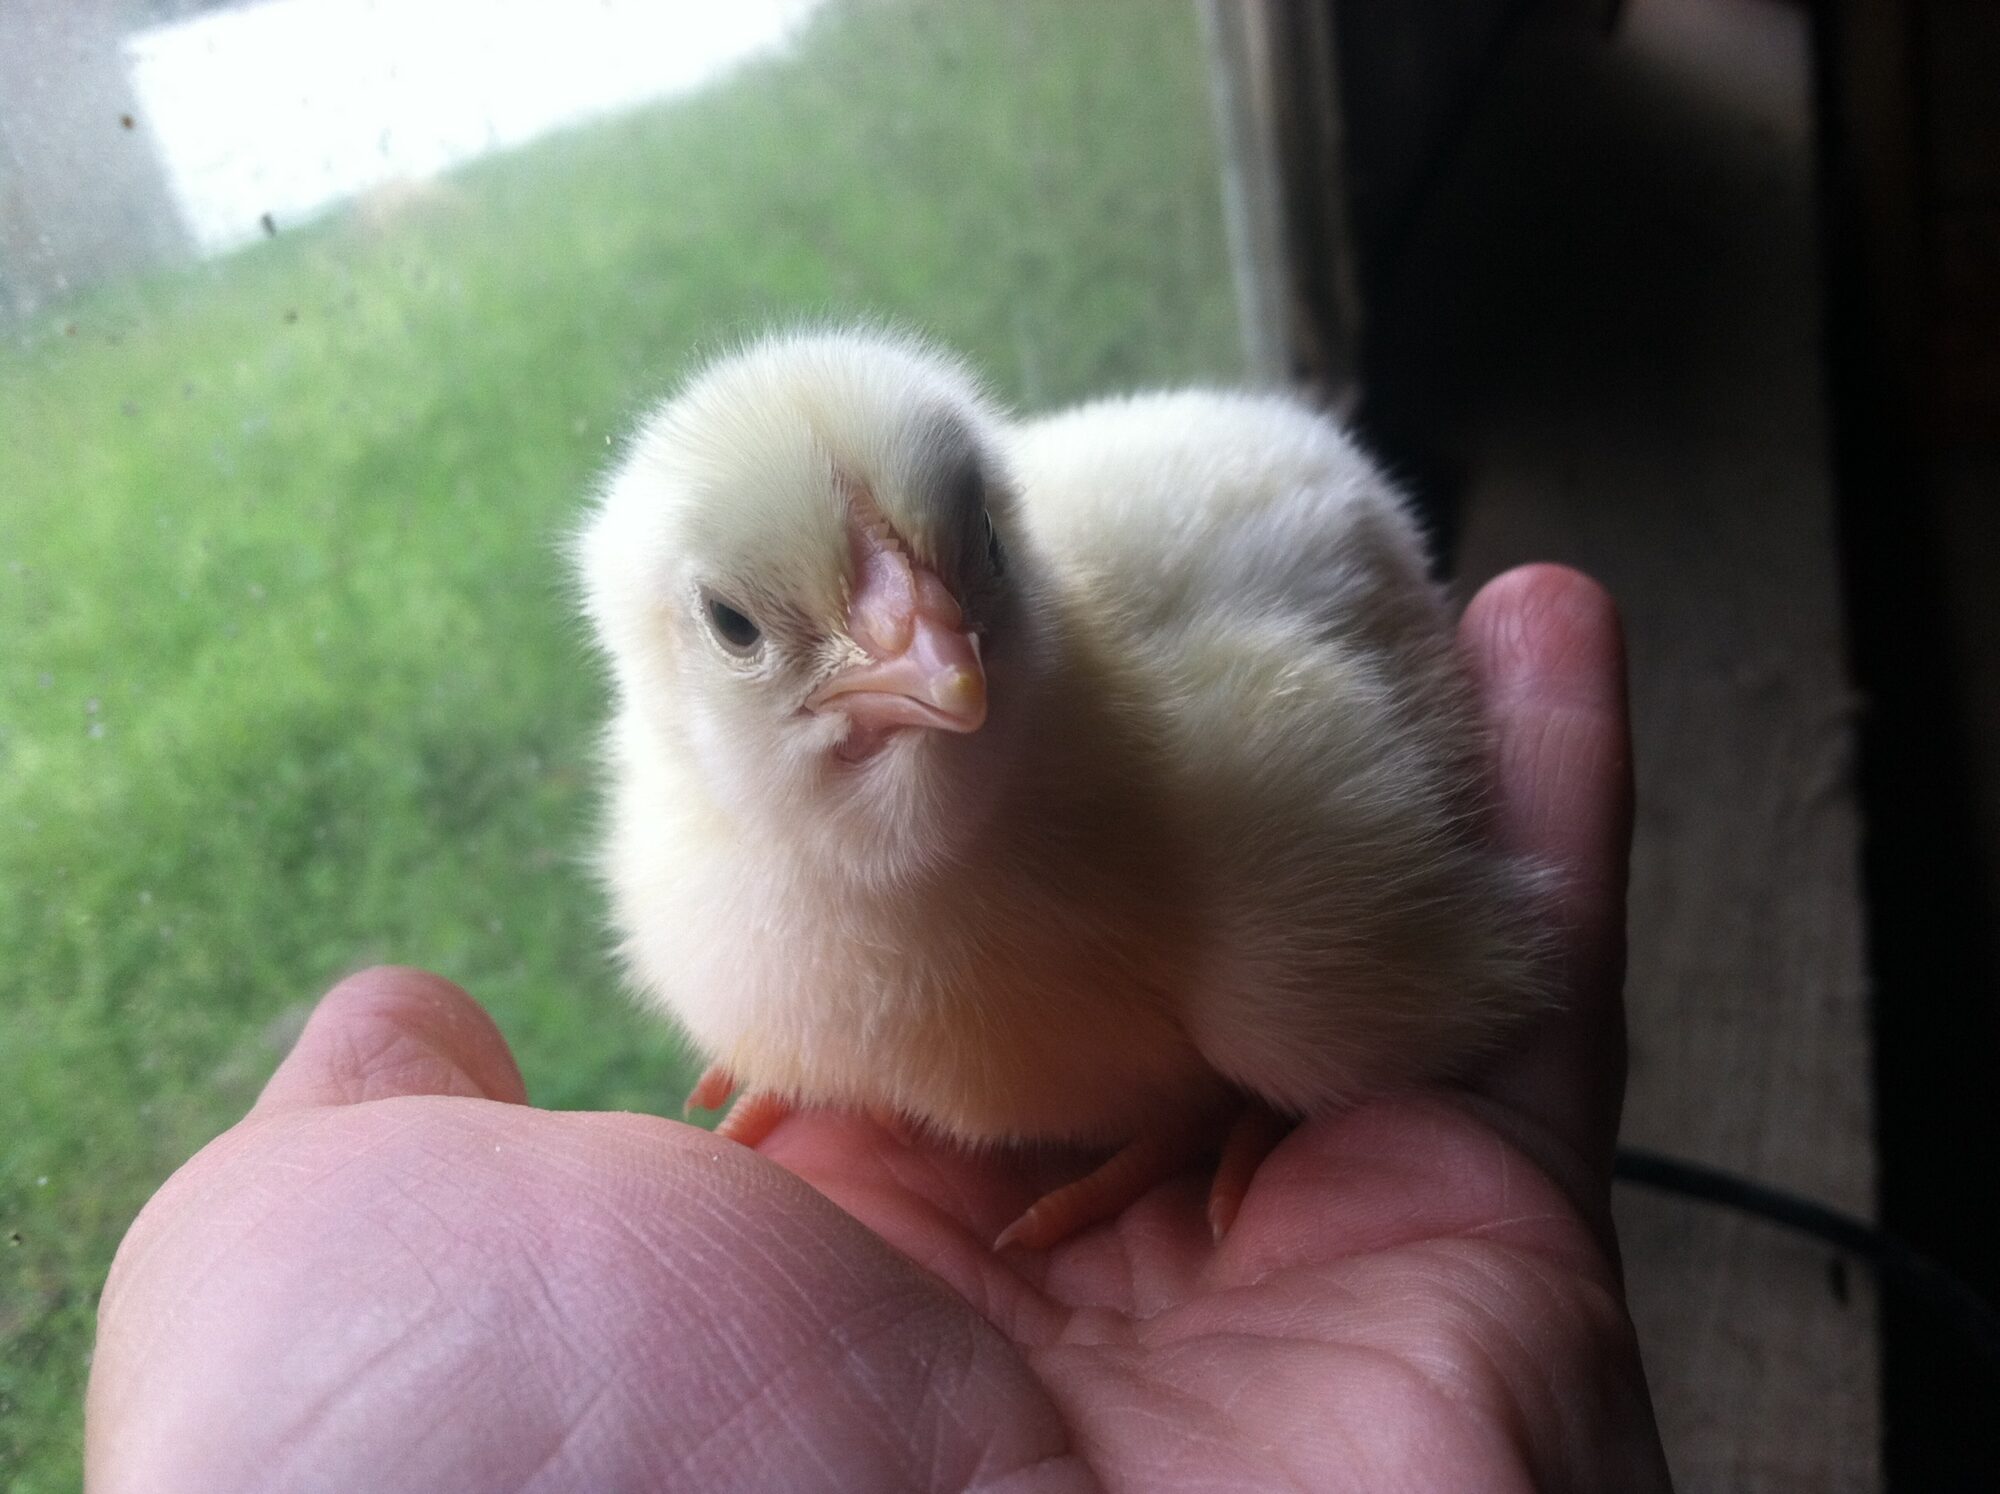 A chick in the hand...